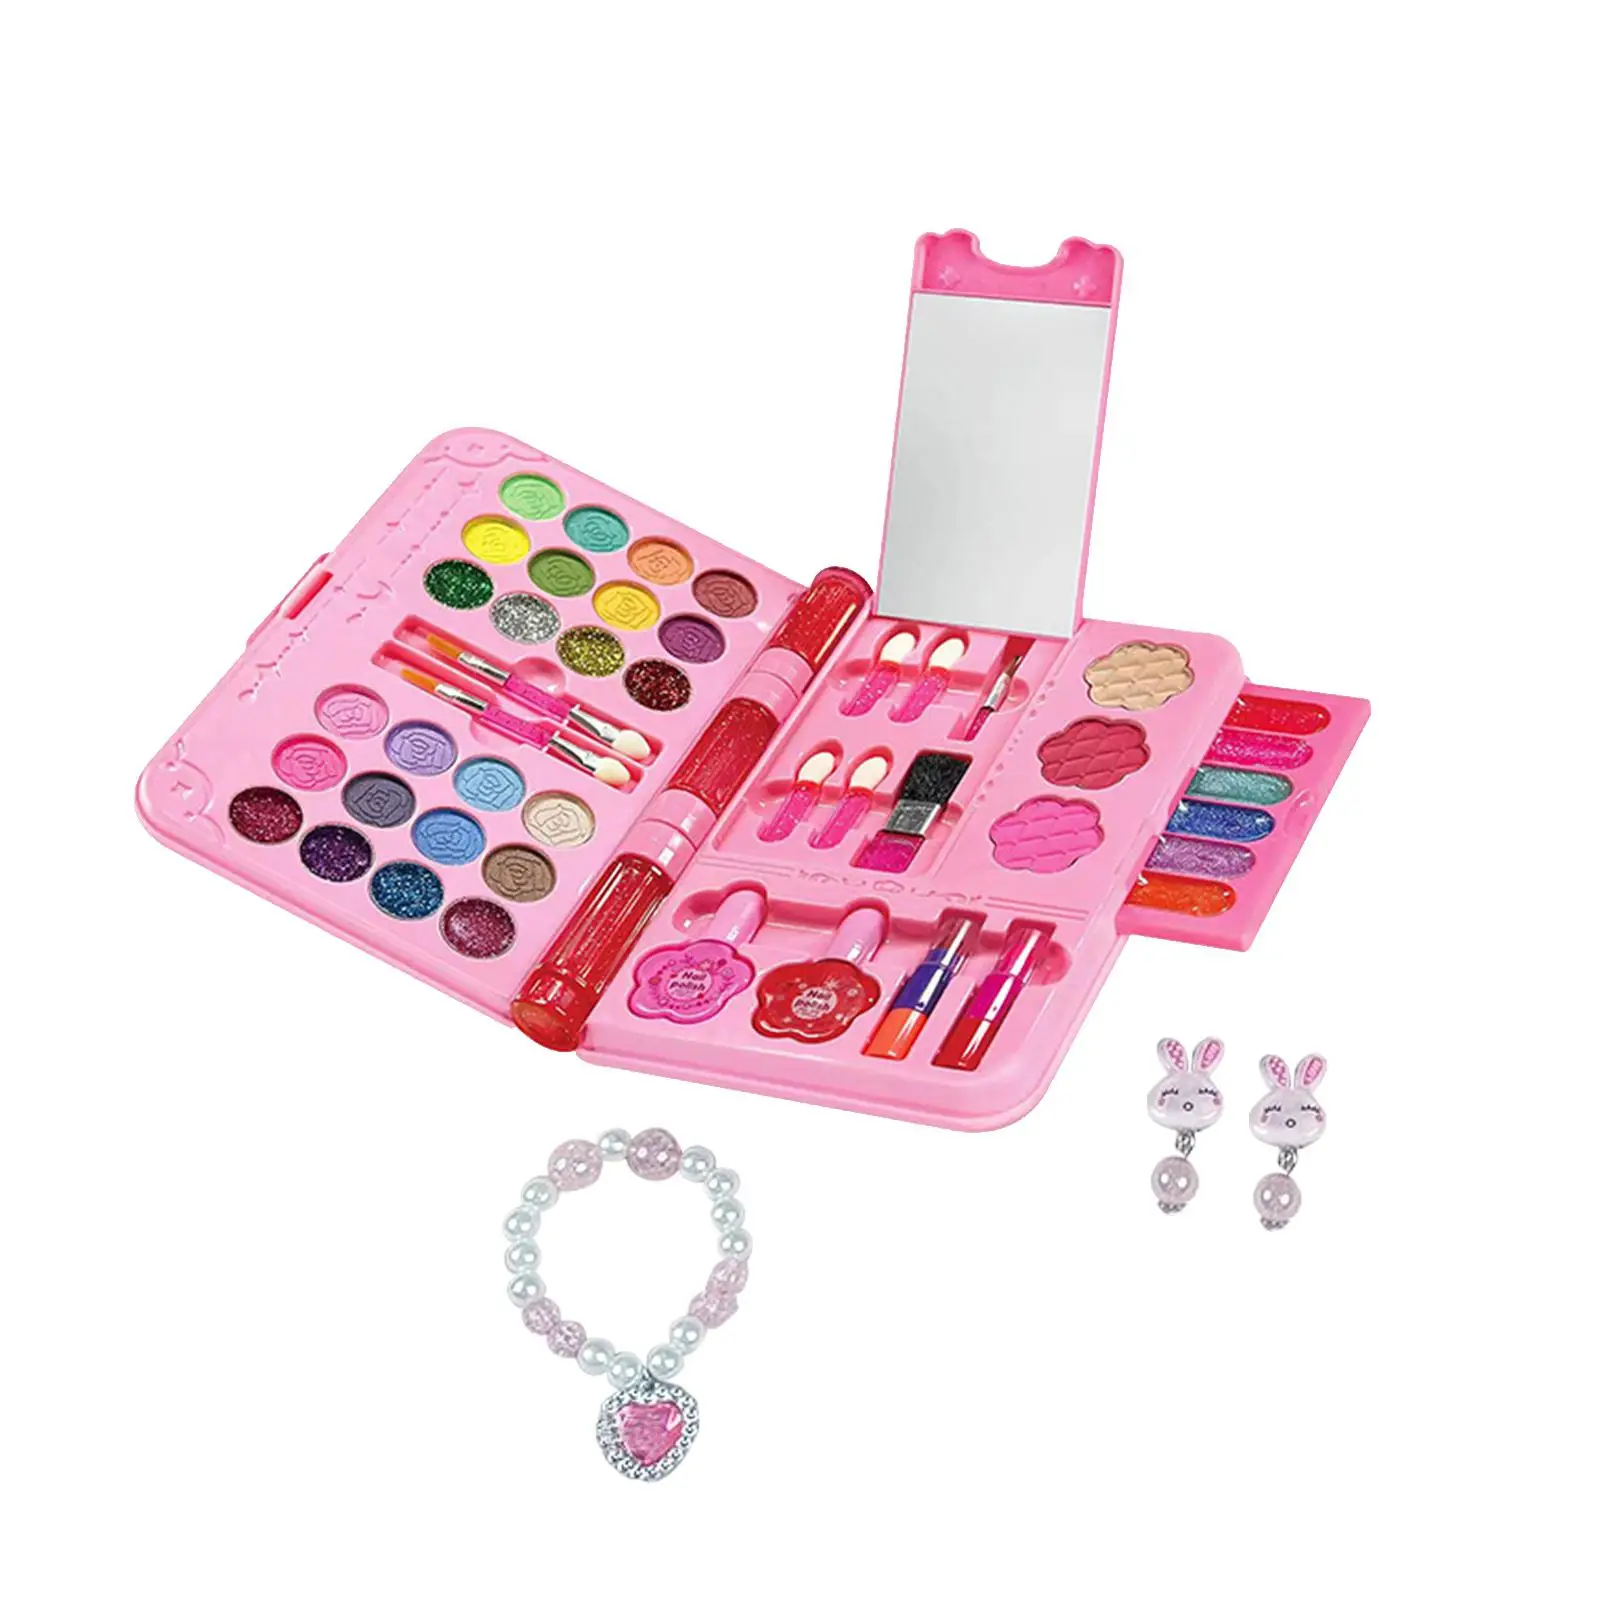 Kids Makeup Set Cosmetics Makeup Toy Set Washable Makeup Beauty Box Pretend Play Makeup Toy Set for Girls Toddlers Children